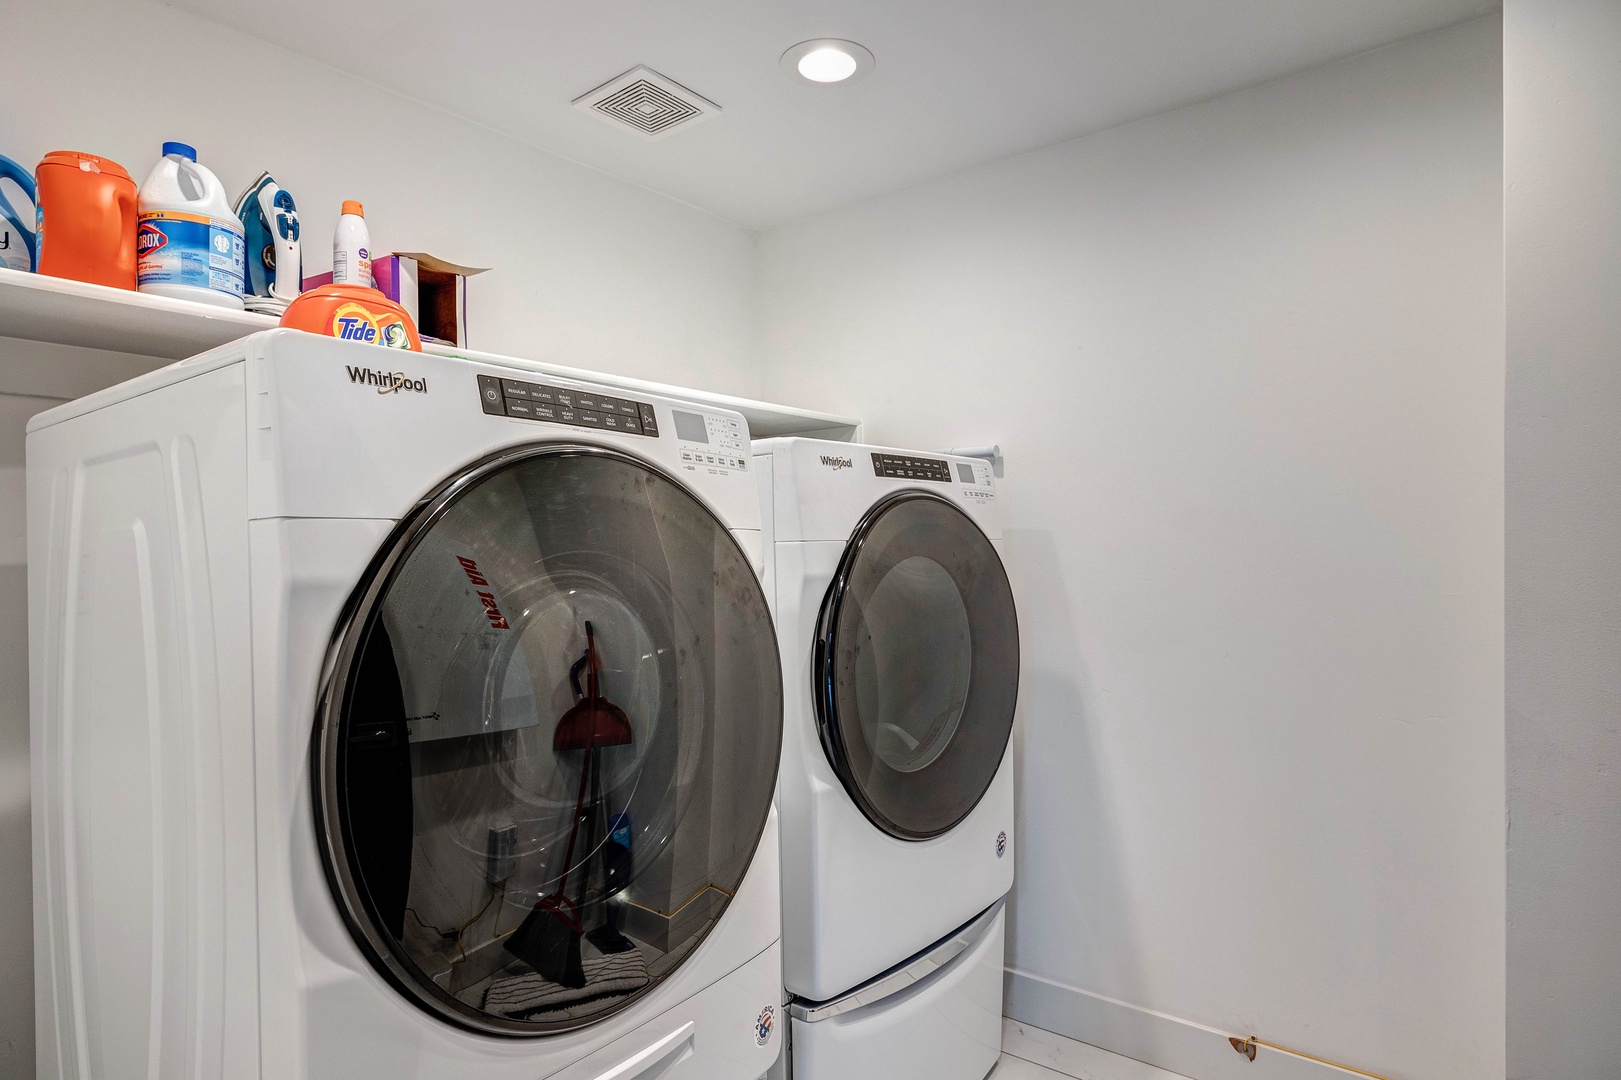 Washer and Dryer are available. Complimentary detergent available